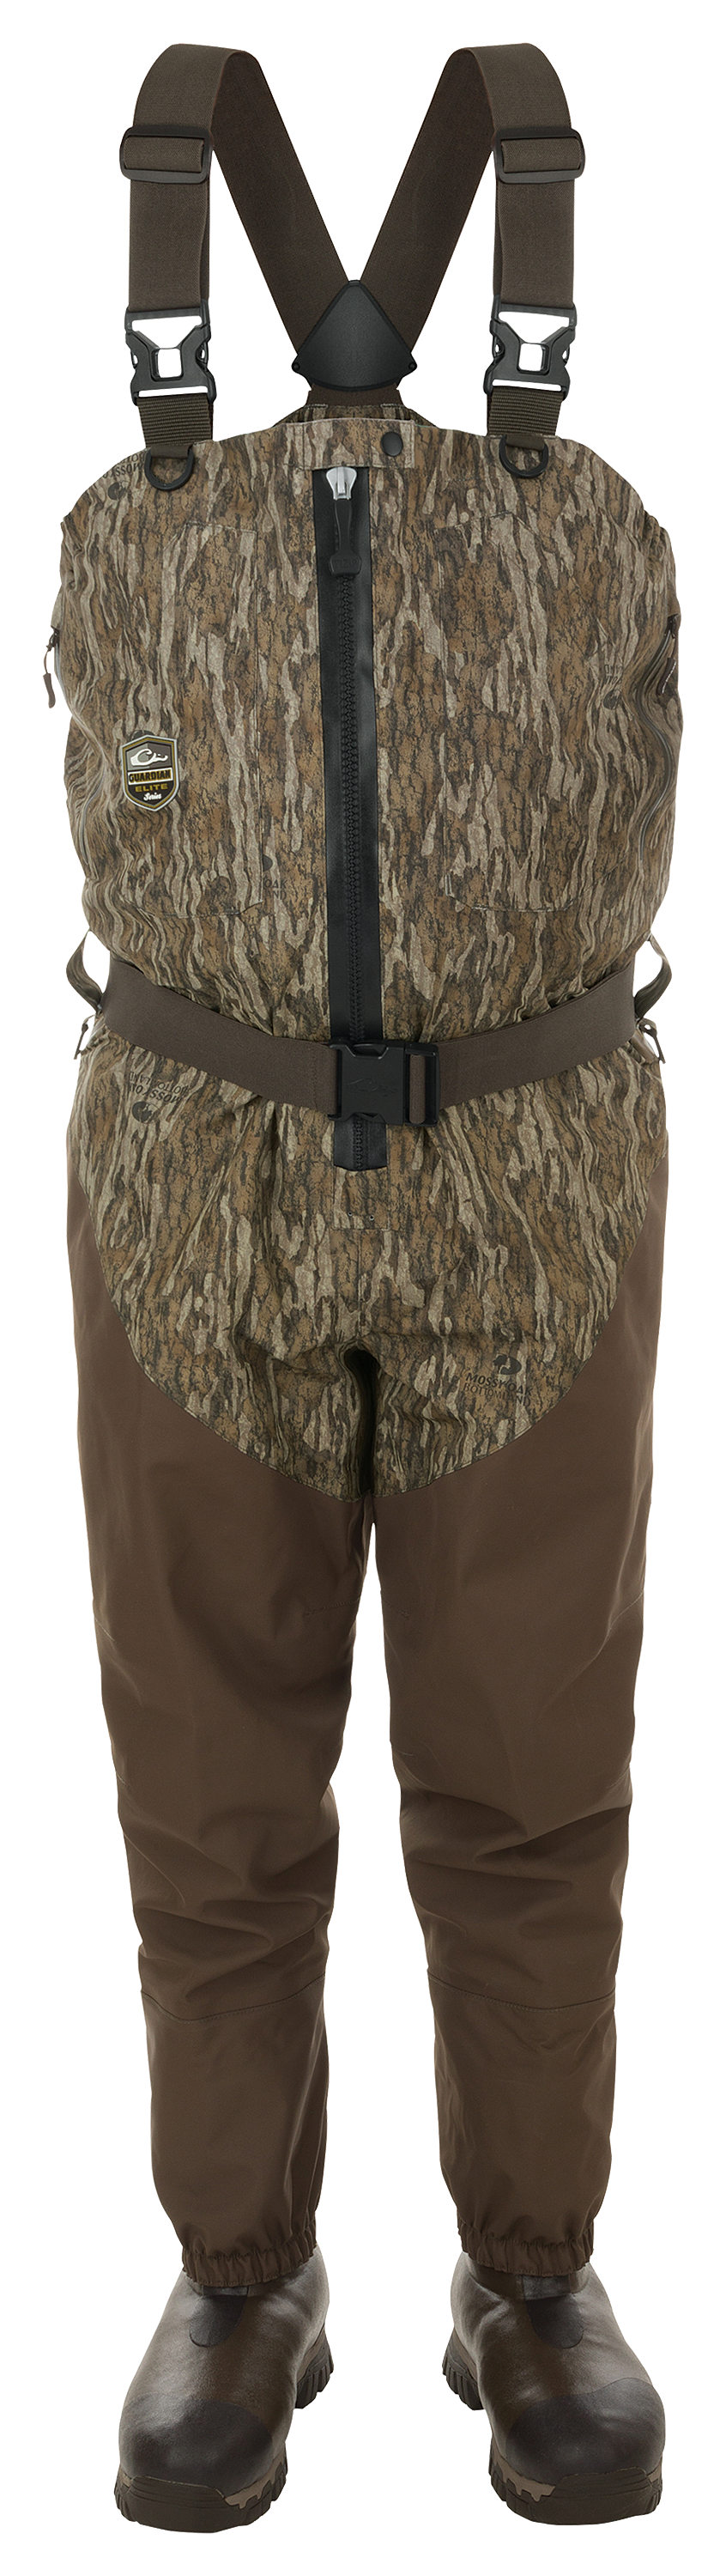 Drake Waterfowl Systems Guardian Elite Front Zip Breathable Waders for Men - Mossy Oak Bottomland - 11/Extra Large